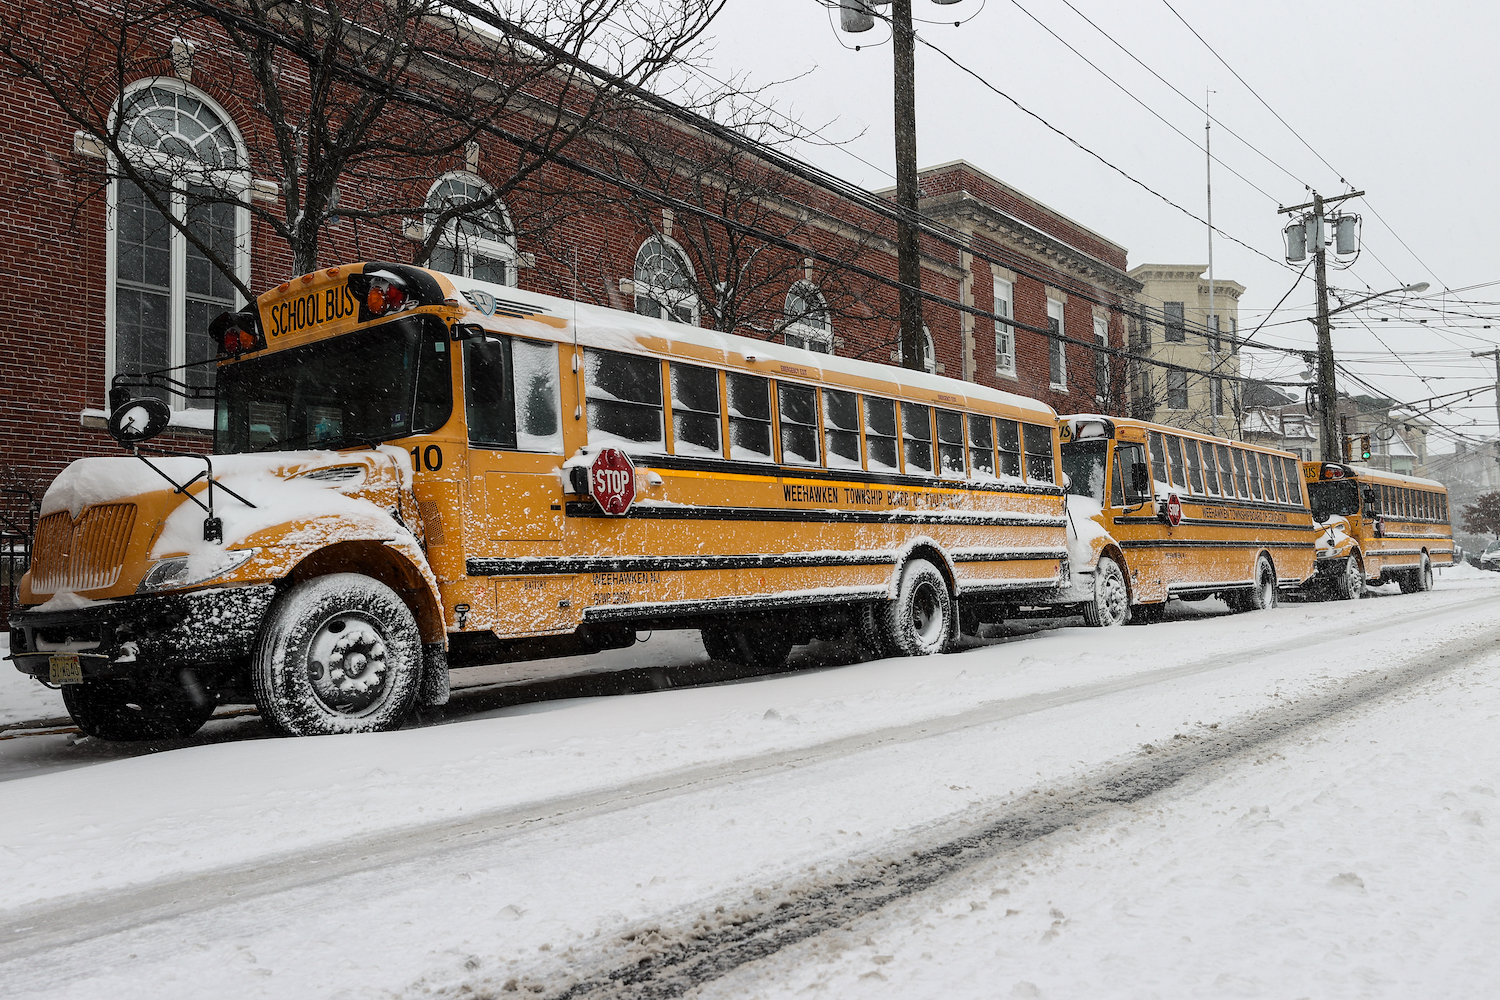 A row of school buses parked on a snowy street in poor weather.